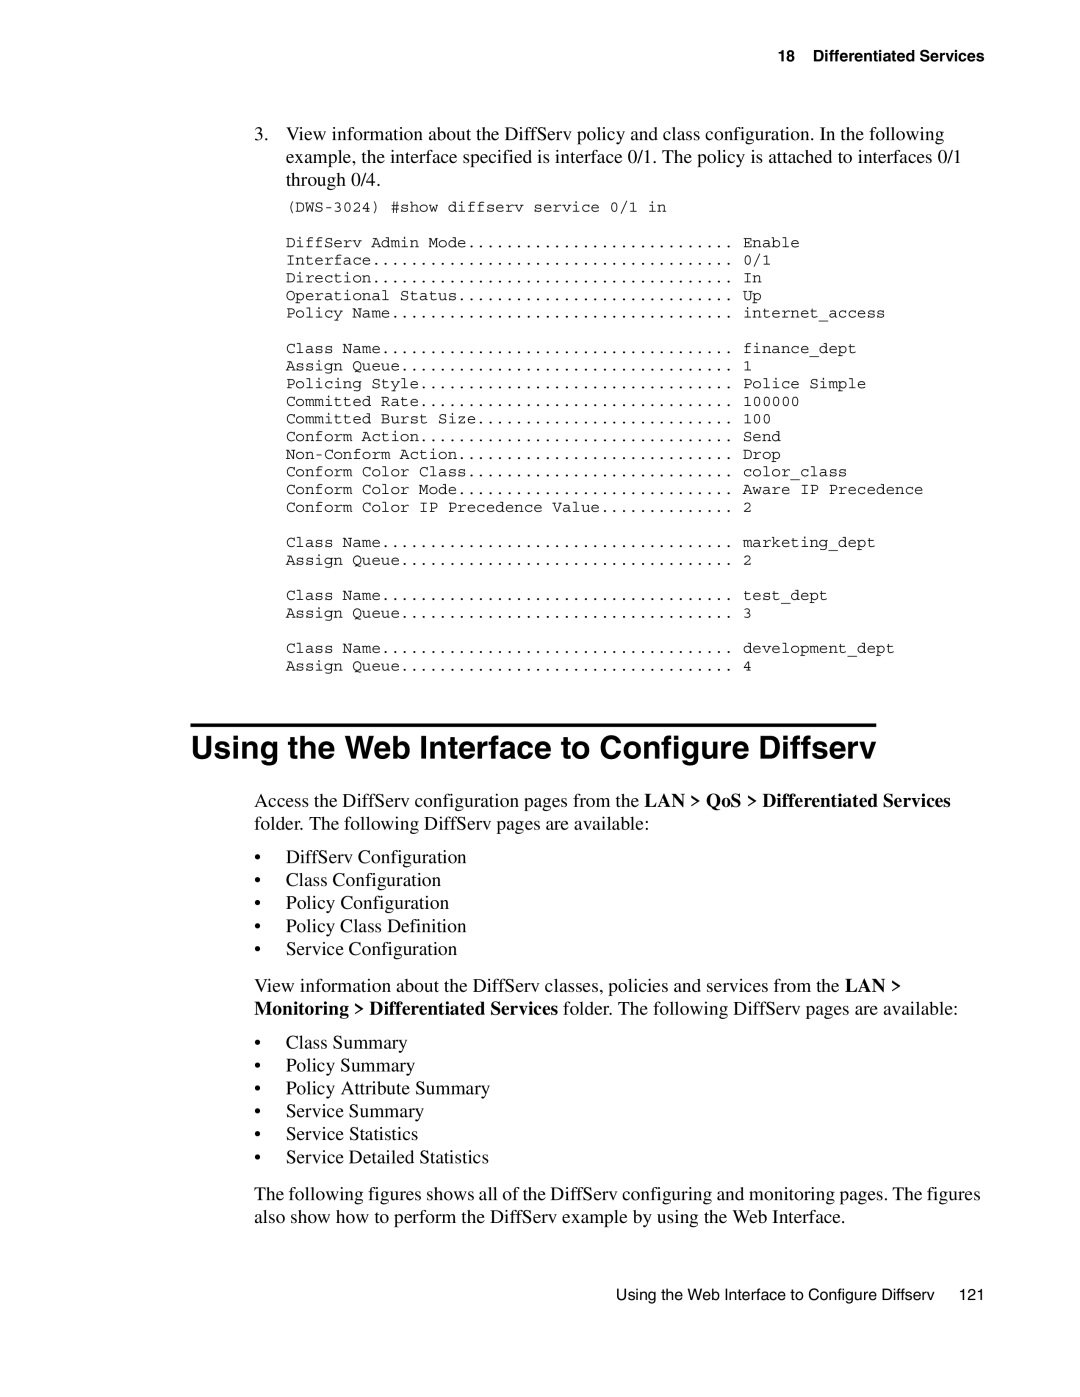 D-Link DWS-3000 manual Using the Web Interface to Configure Diffserv 